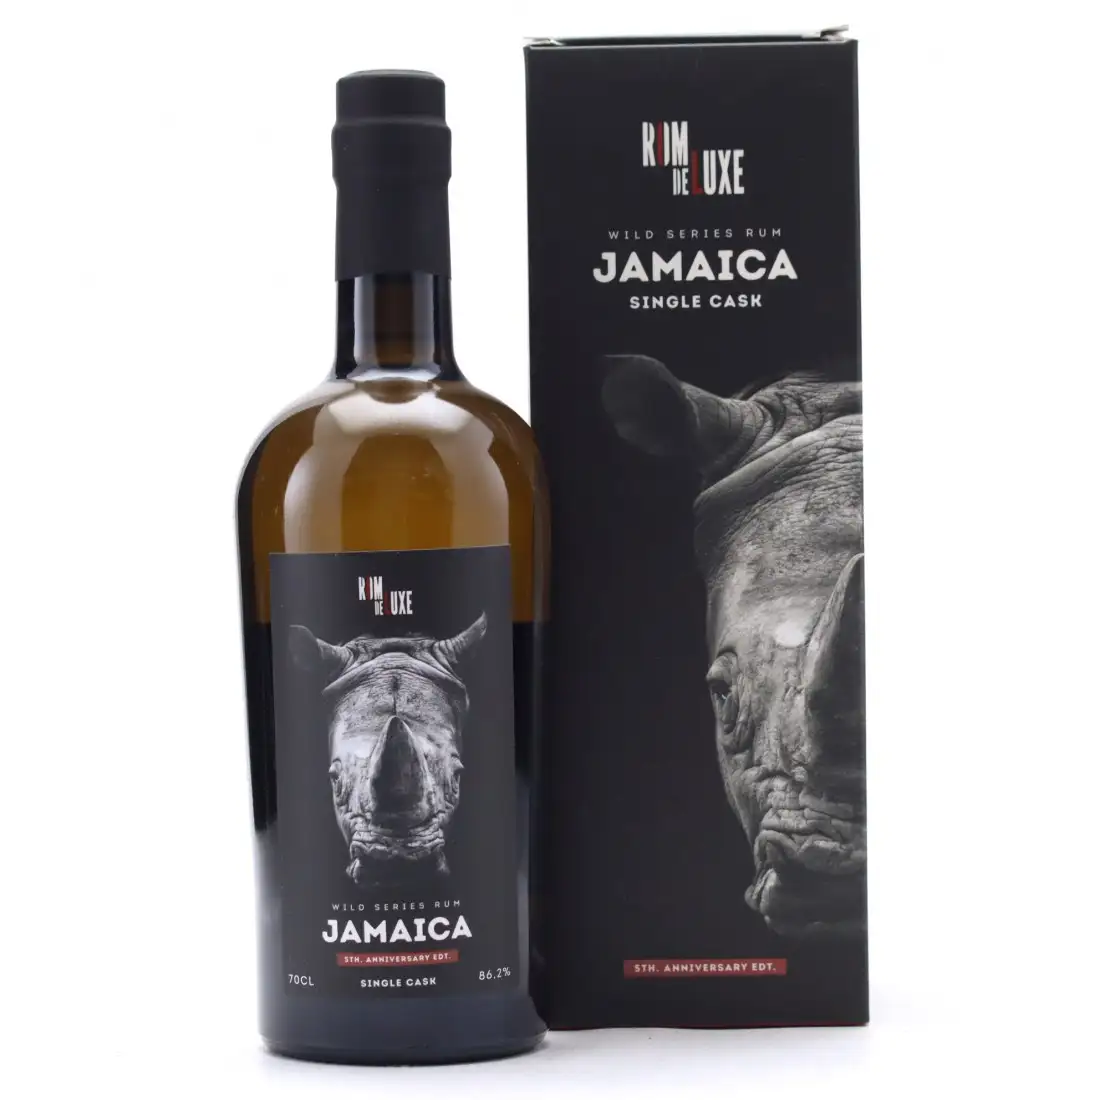 Image of the front of the bottle of the rum Wild Series Rum Jamaica No. 17 (Caroni Finish) DOK